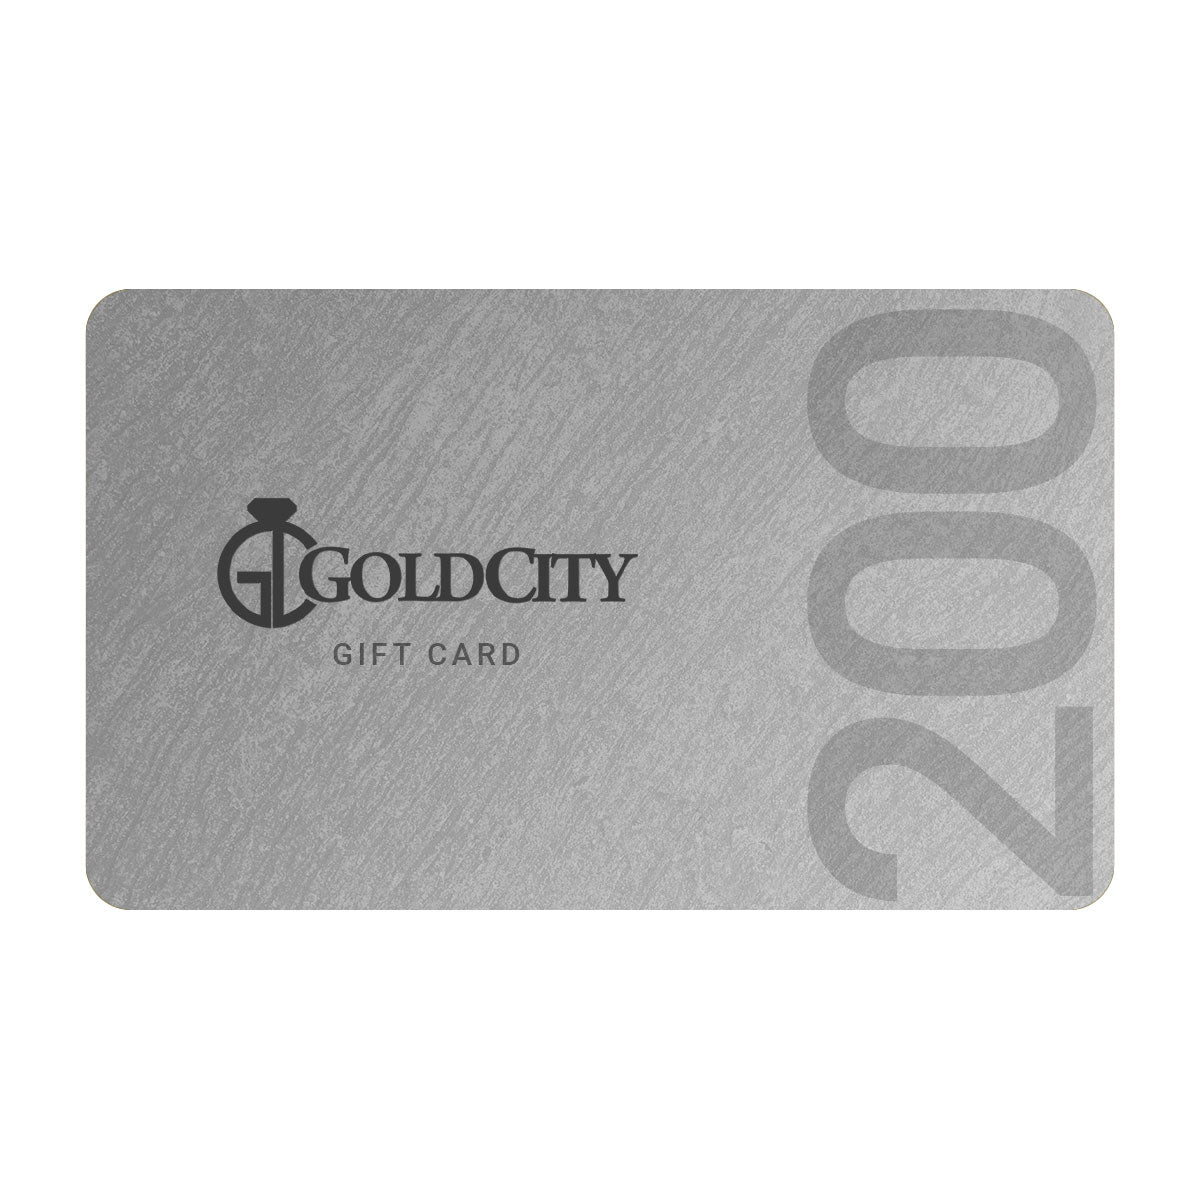 GOLD CITY GIFT CARD